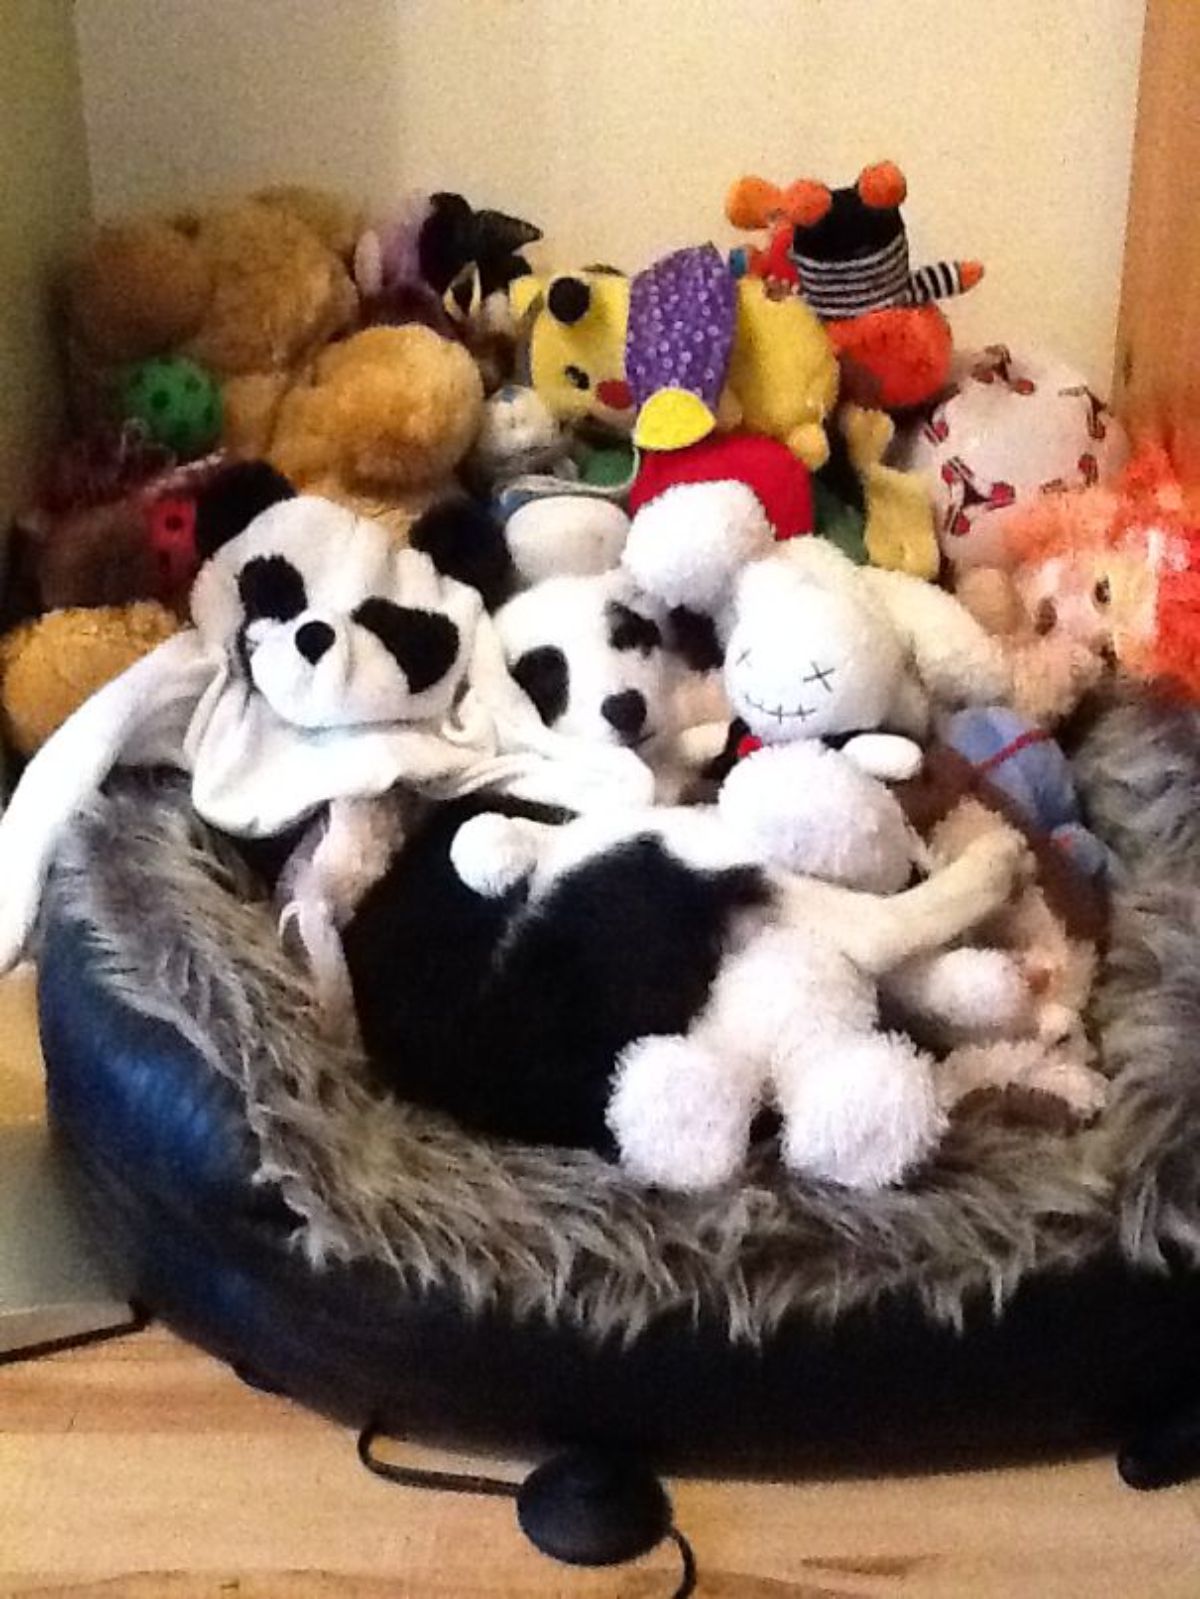 puppy hidden in a large pile of stuffed toys on a grey and black dog bed